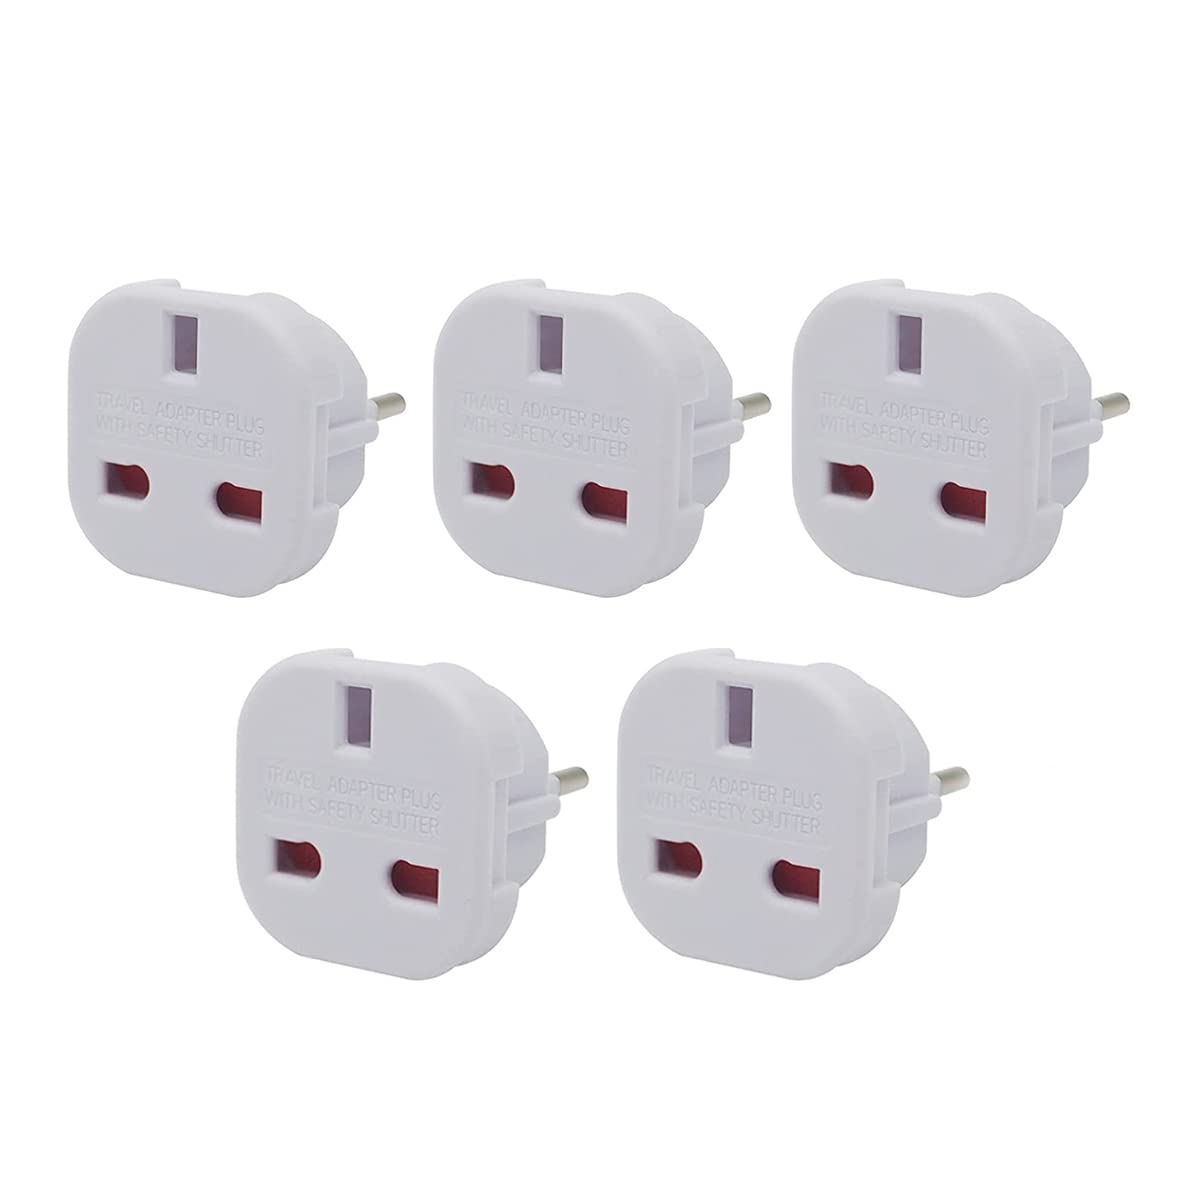 EU Travel Adapter UK to European Plug Adapter, Europe Converter Type C, E, F for Spain, France, Italy, Portugal, Germany, Netherlands, Greece, Poland, Turkey, Bulgaria and more